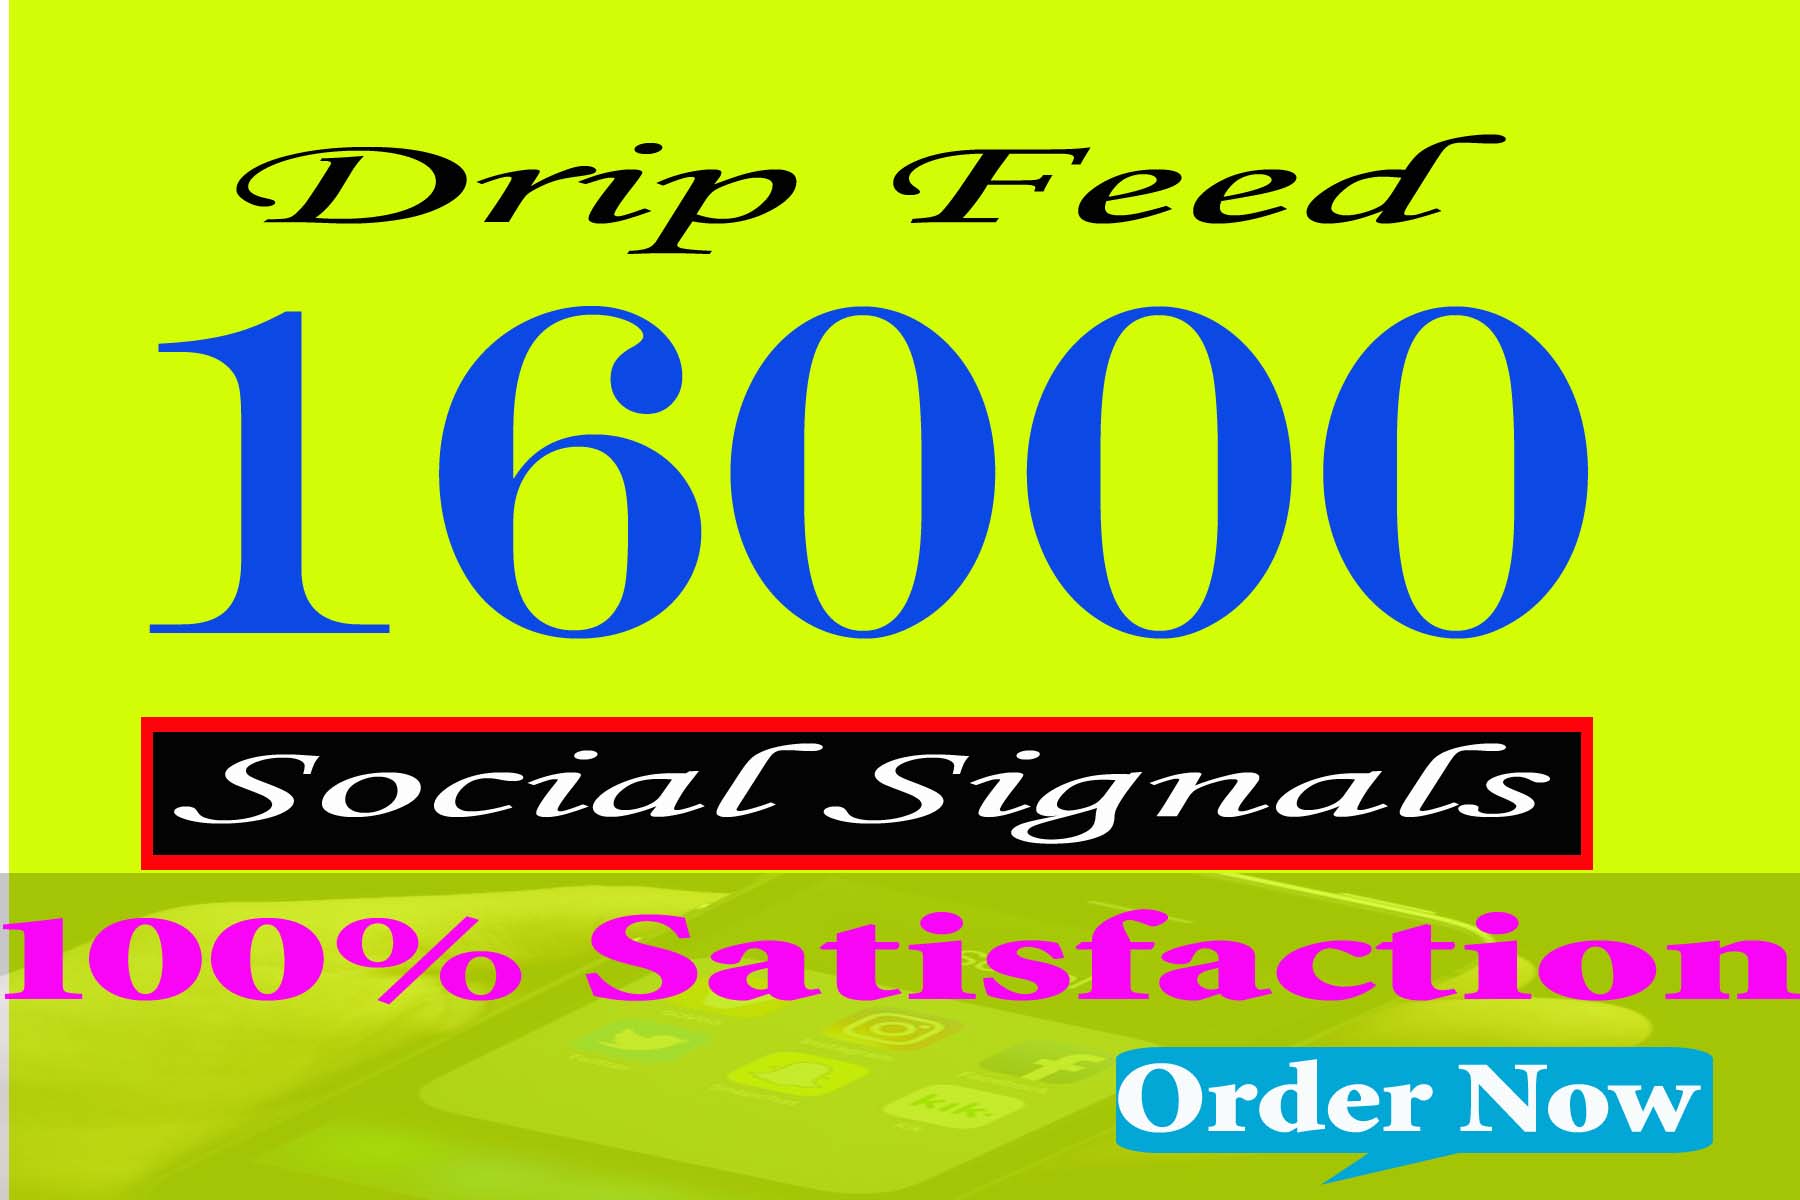 HQ Drip Feed 16000 White Hat Seo Backlinks Social Signals Improving Website